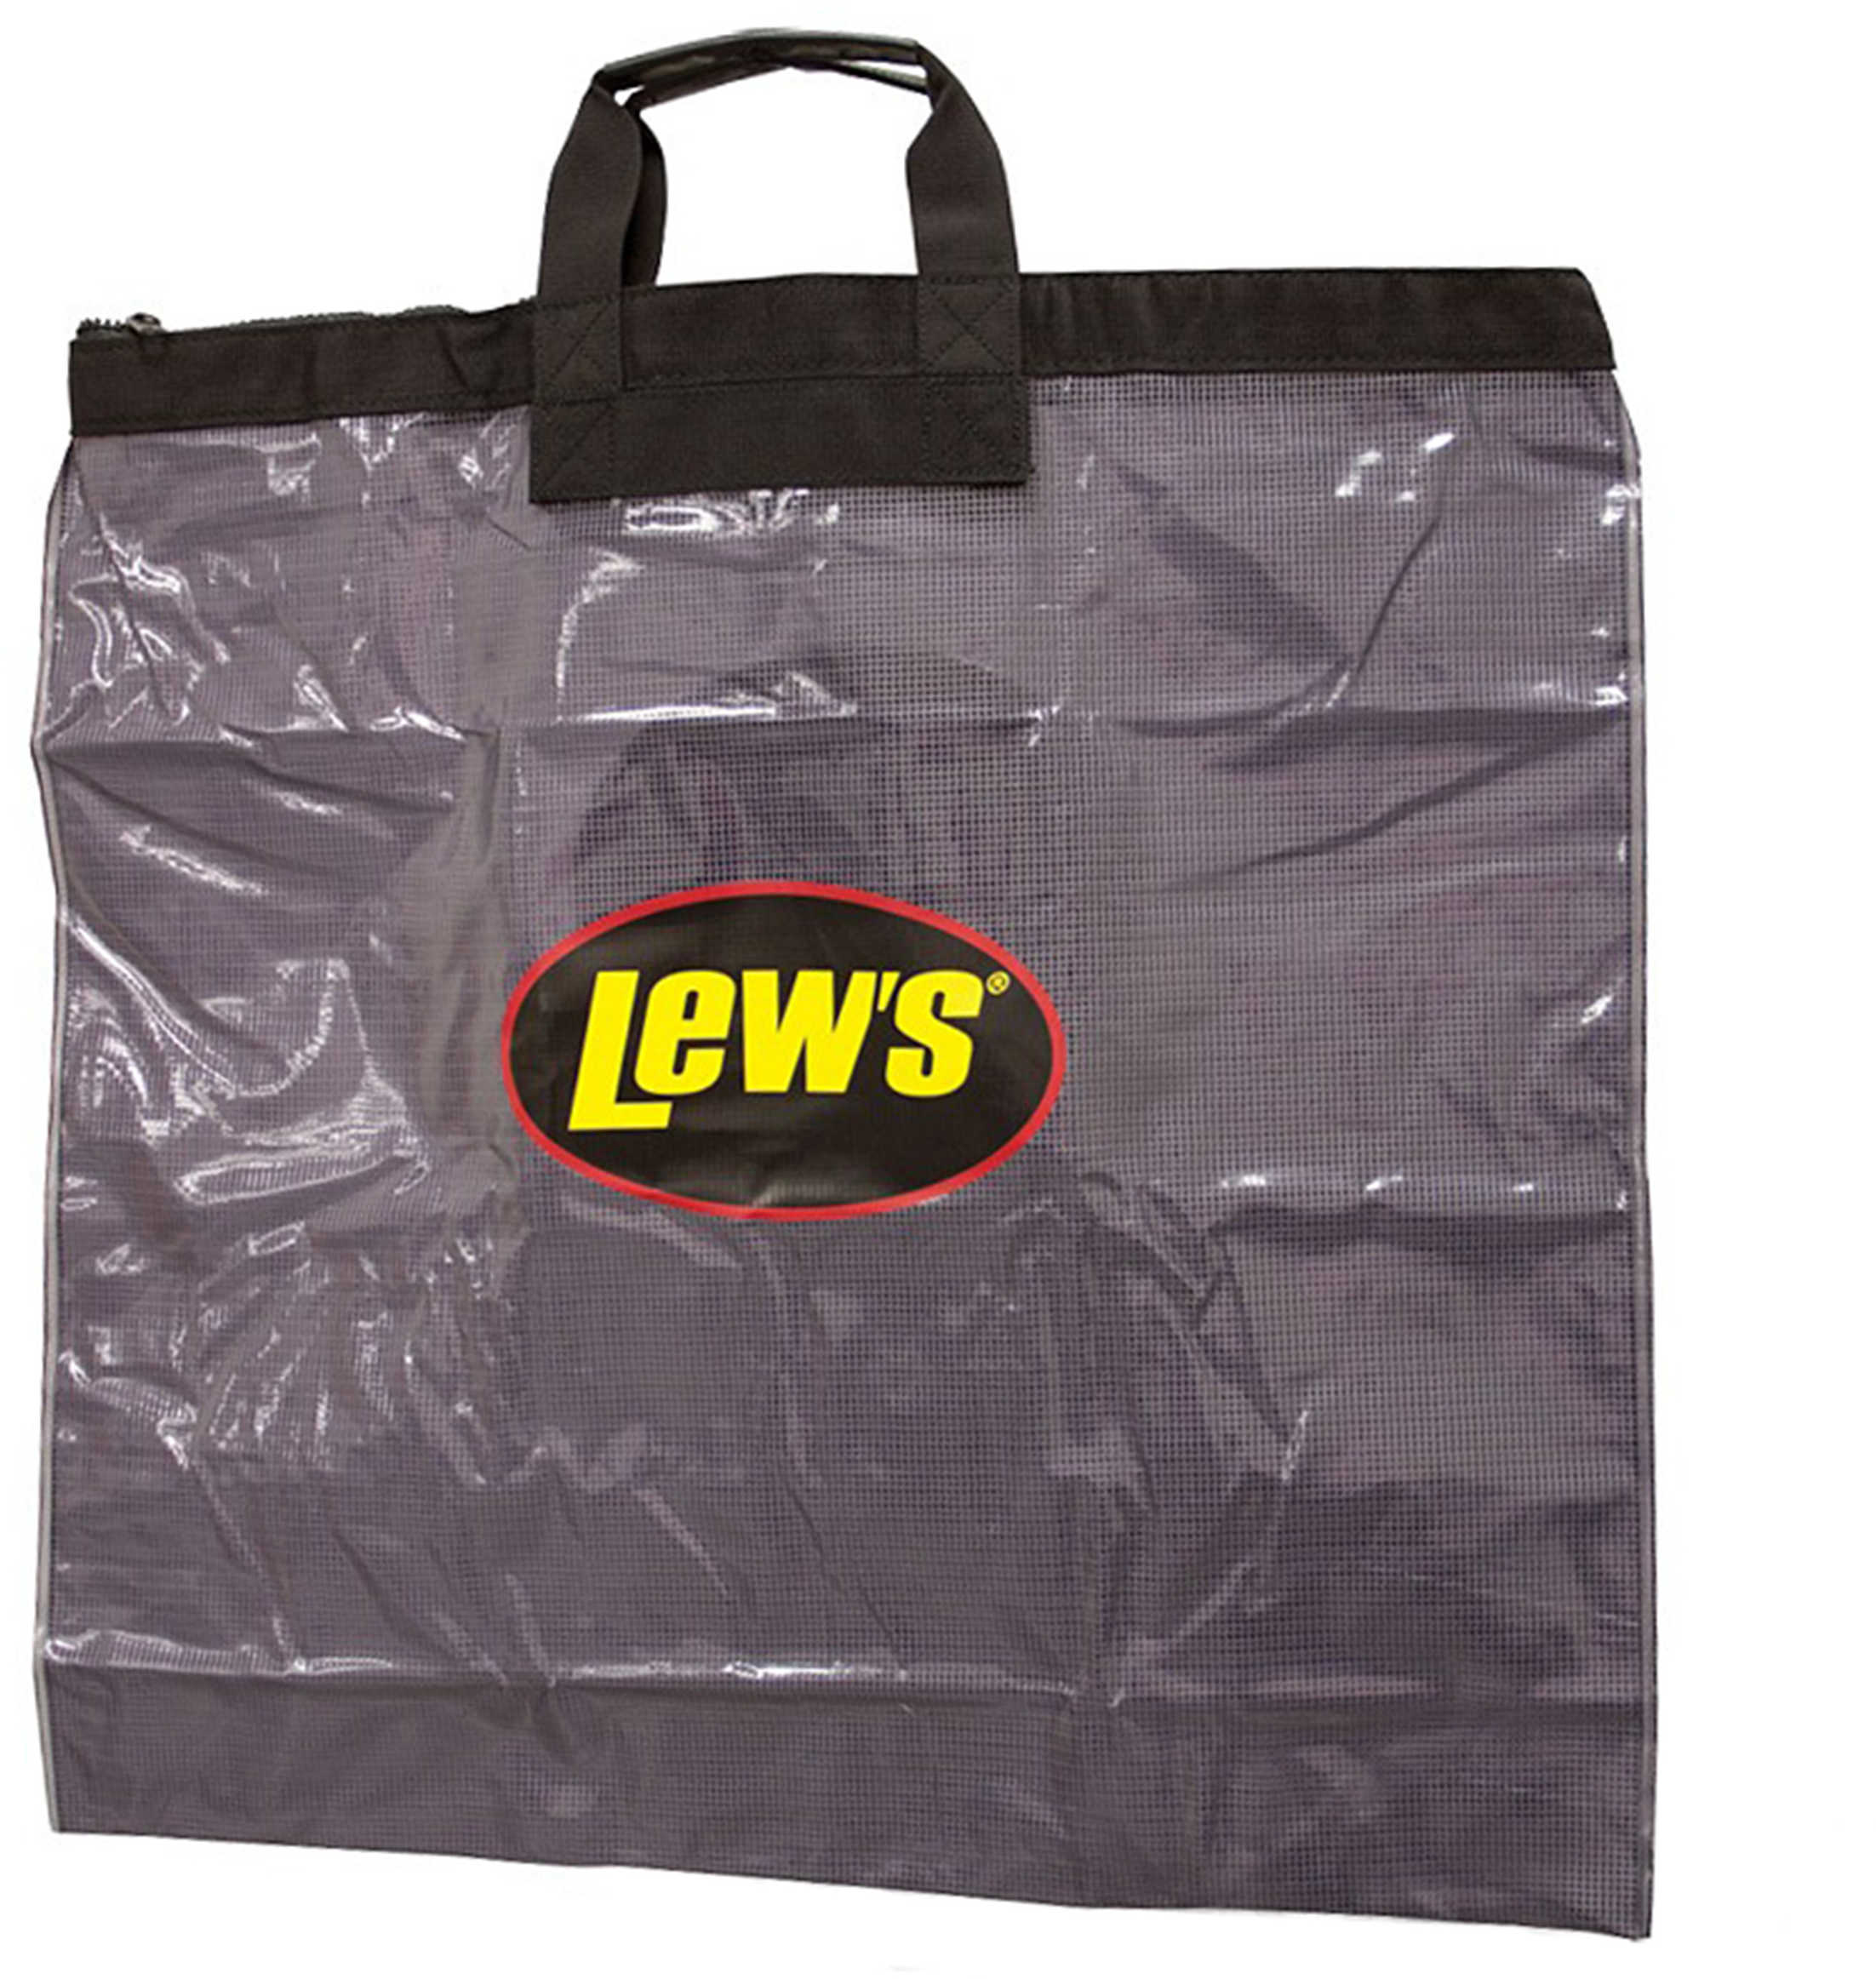 Lews Tournament Weigh In Bag with Heavy Duty Zipper Black Md: LSB1